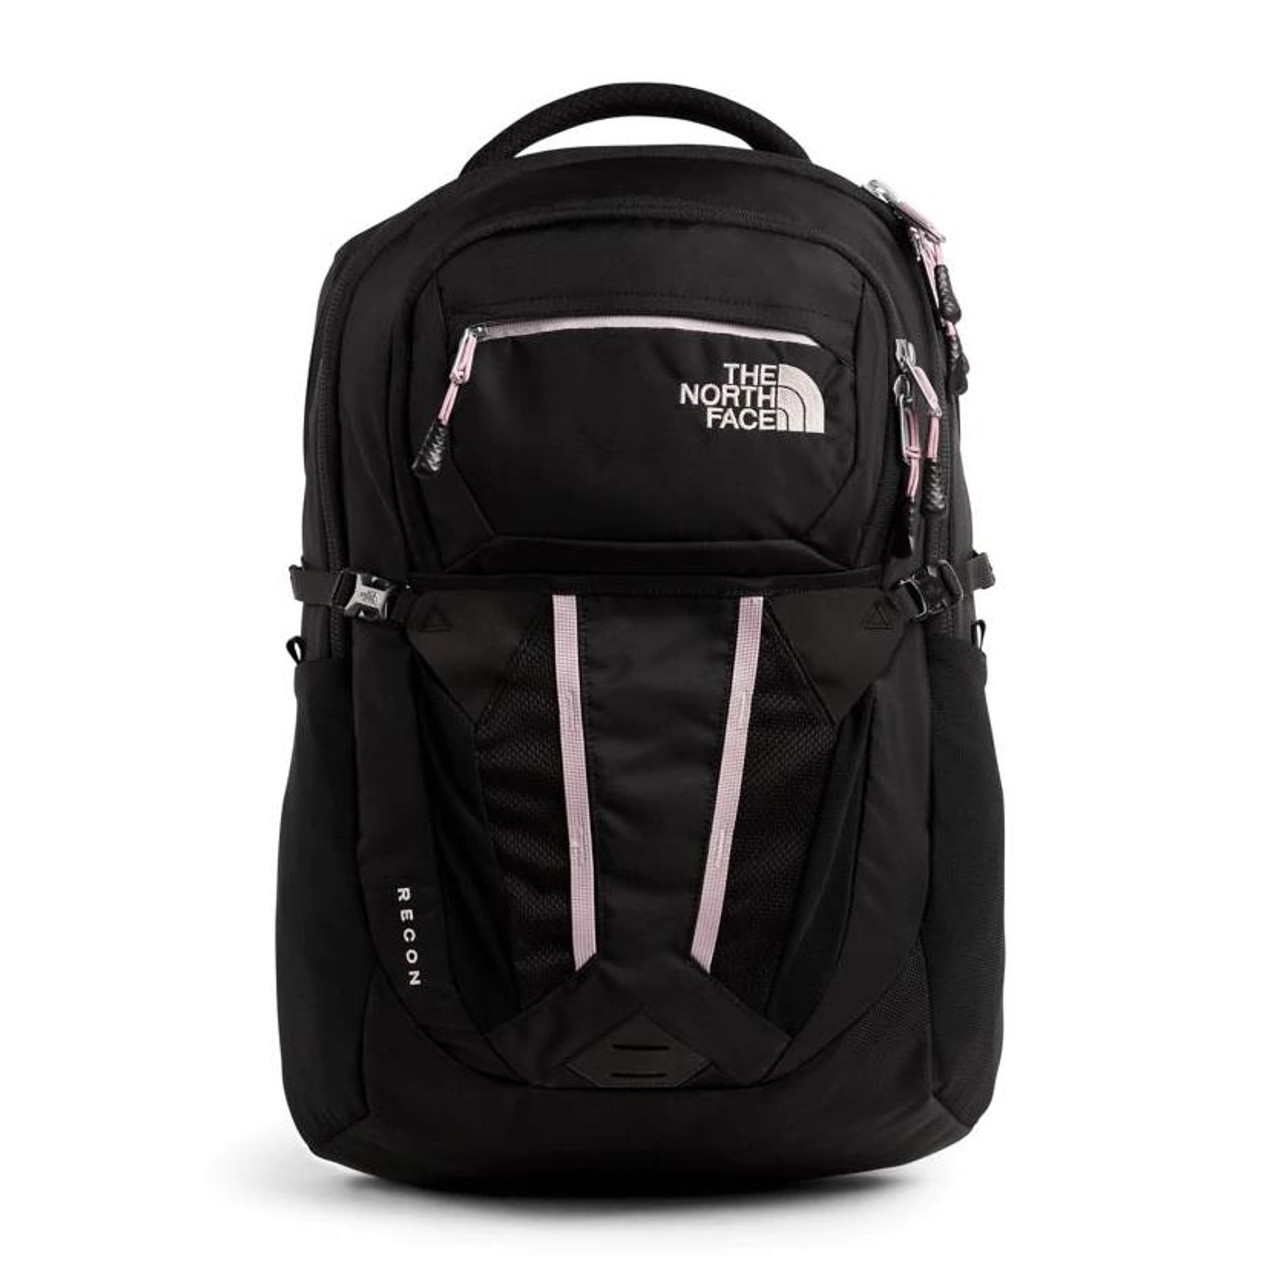 The North Face Women's Recon Backpack 